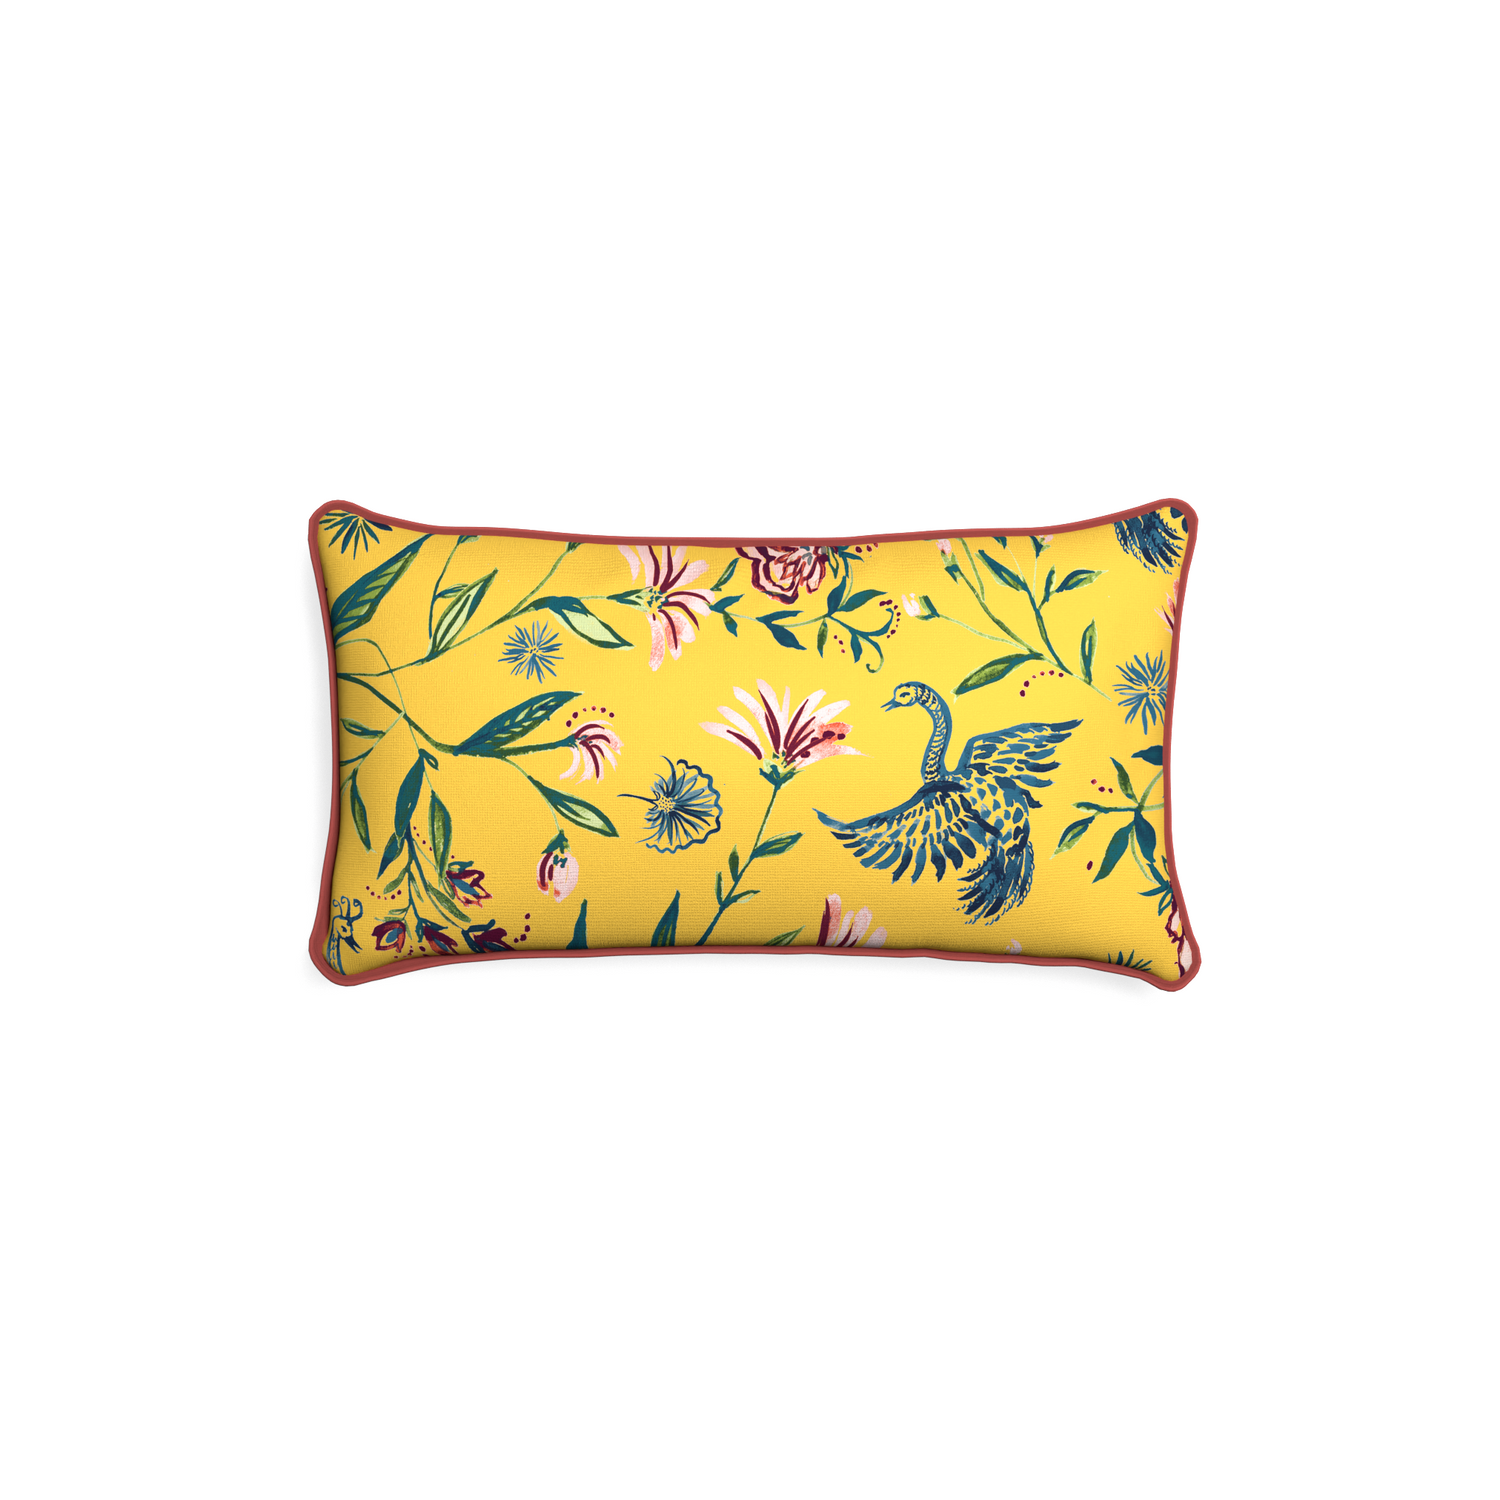 Petite-lumbar daphne canary custom yellow chinoiseriepillow with c piping on white background